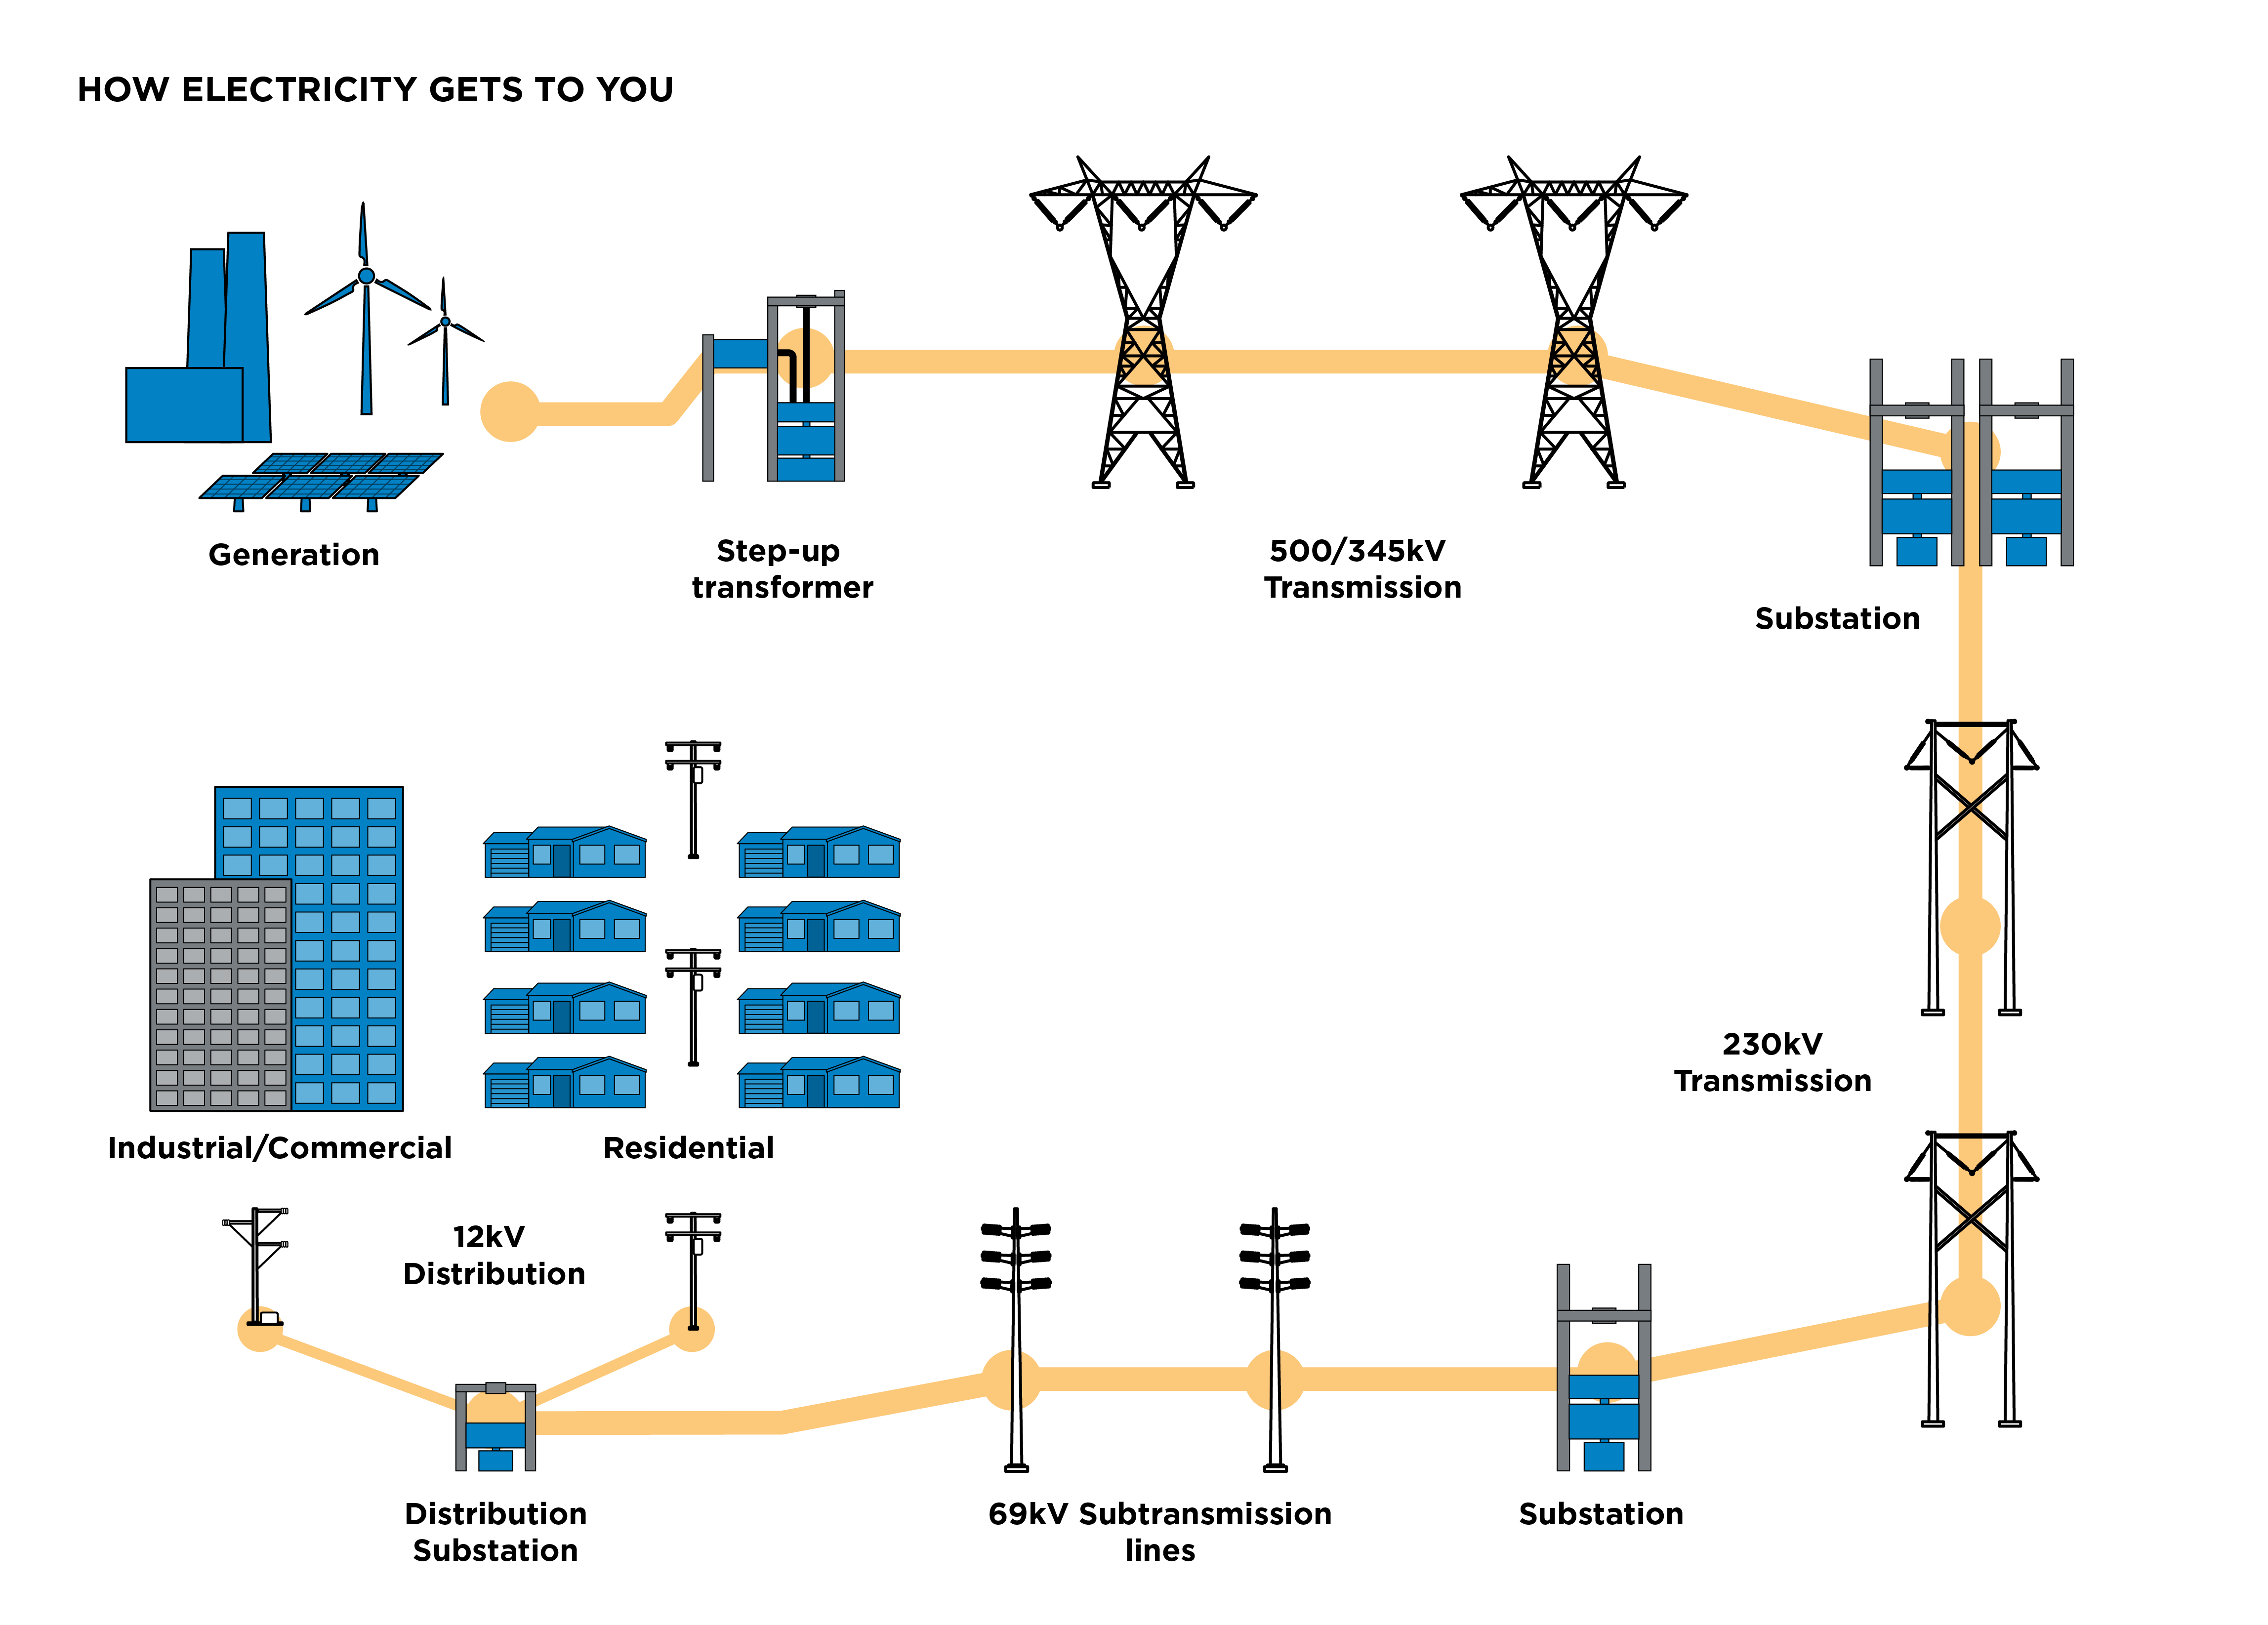 How electricity gets to you diagram